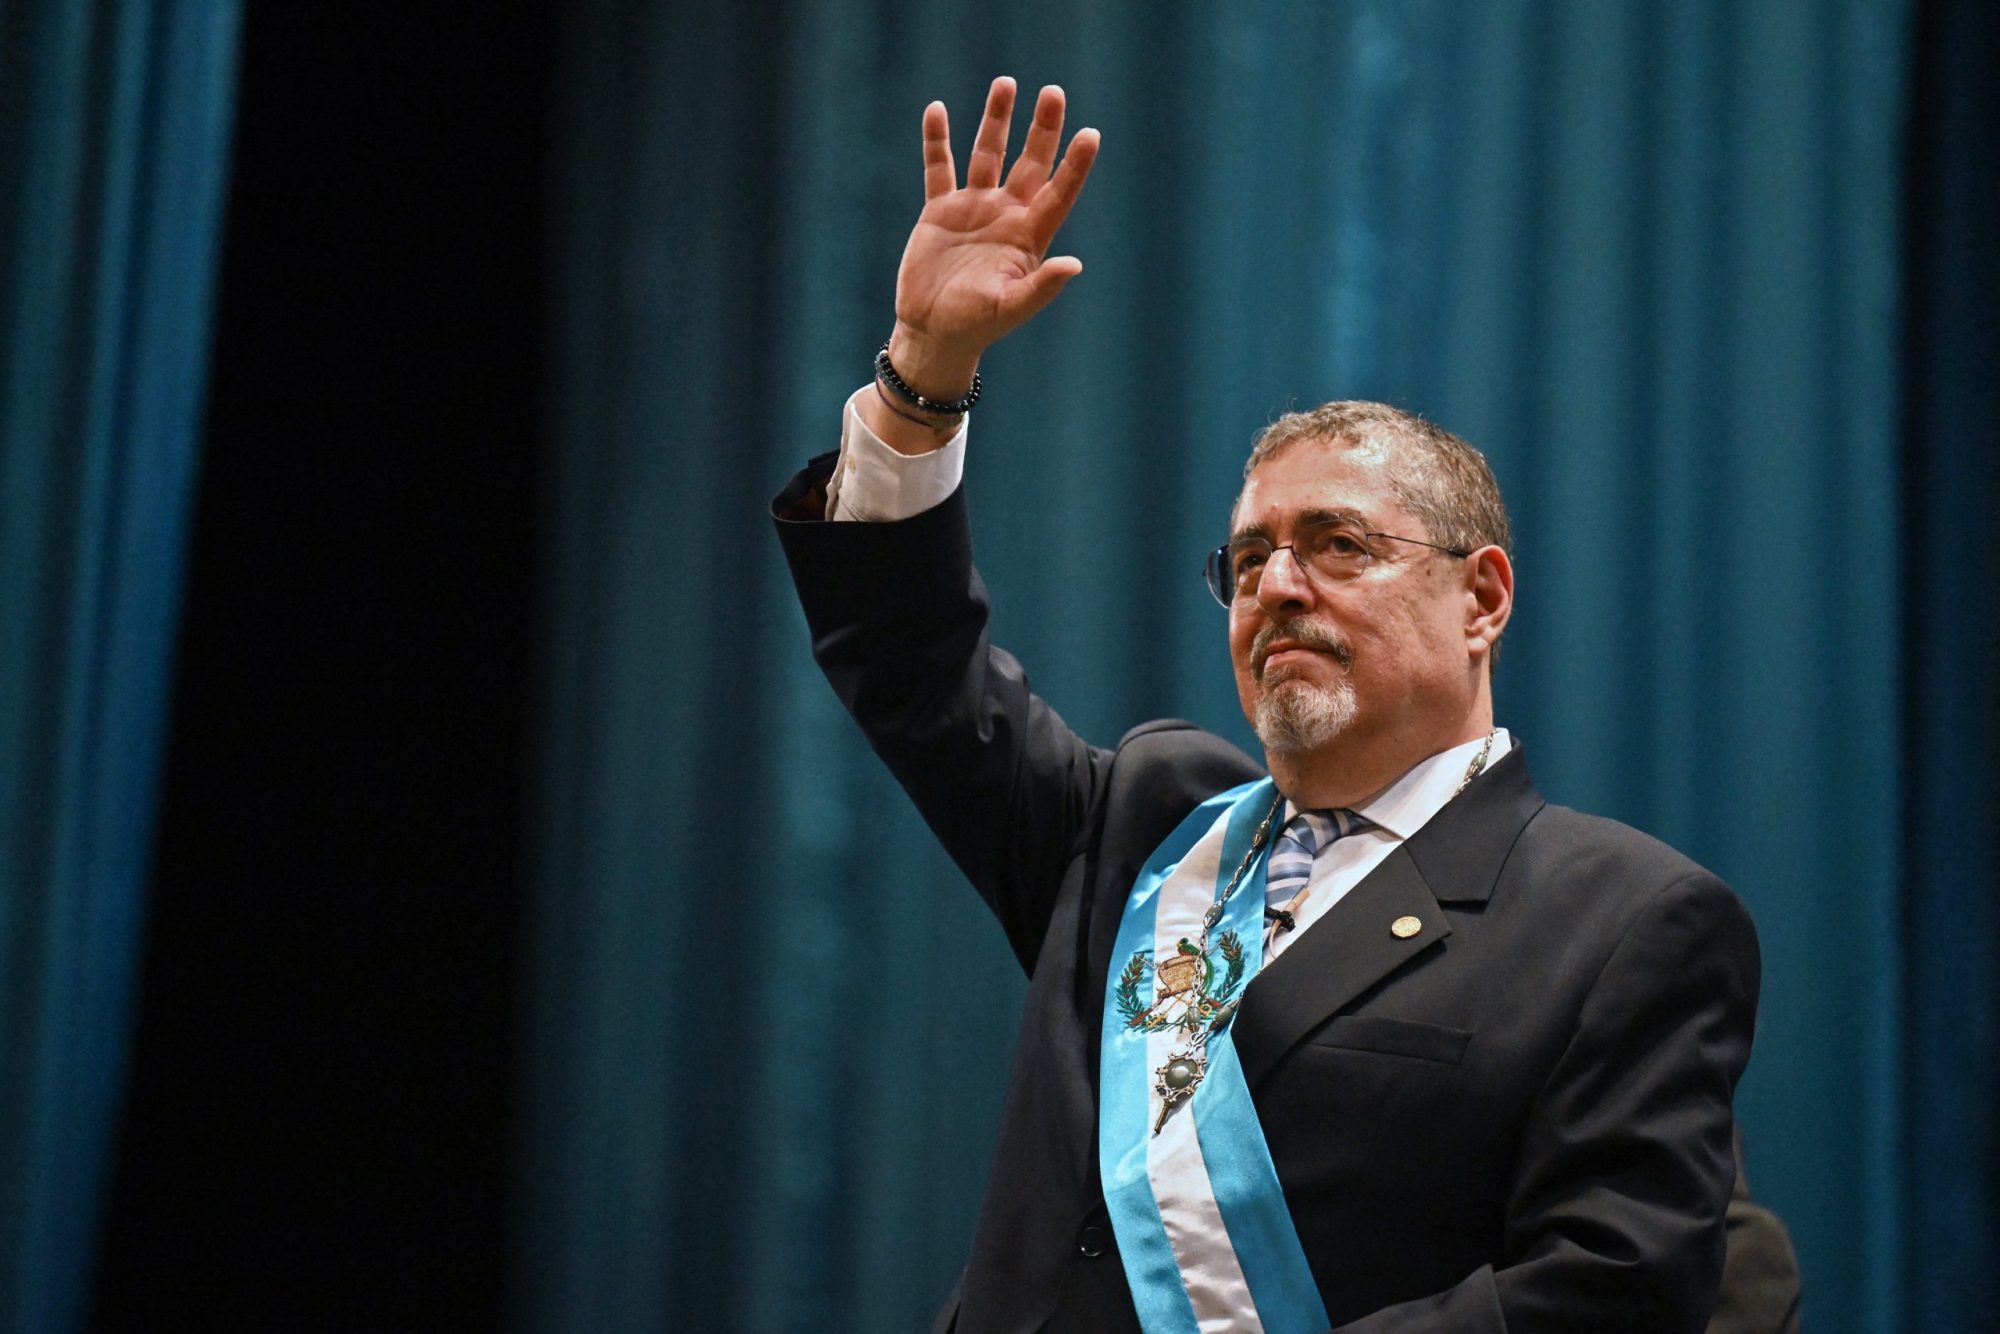 Guatemala's new President Bernardo Arevalo waves after swearing in during his inauguration ceremony at the Miguel Angel Asturias Cultural Centre in Guatemala City, early on January 15, 2024. Photo by JOHAN ORDONEZ/AFP via Getty Images